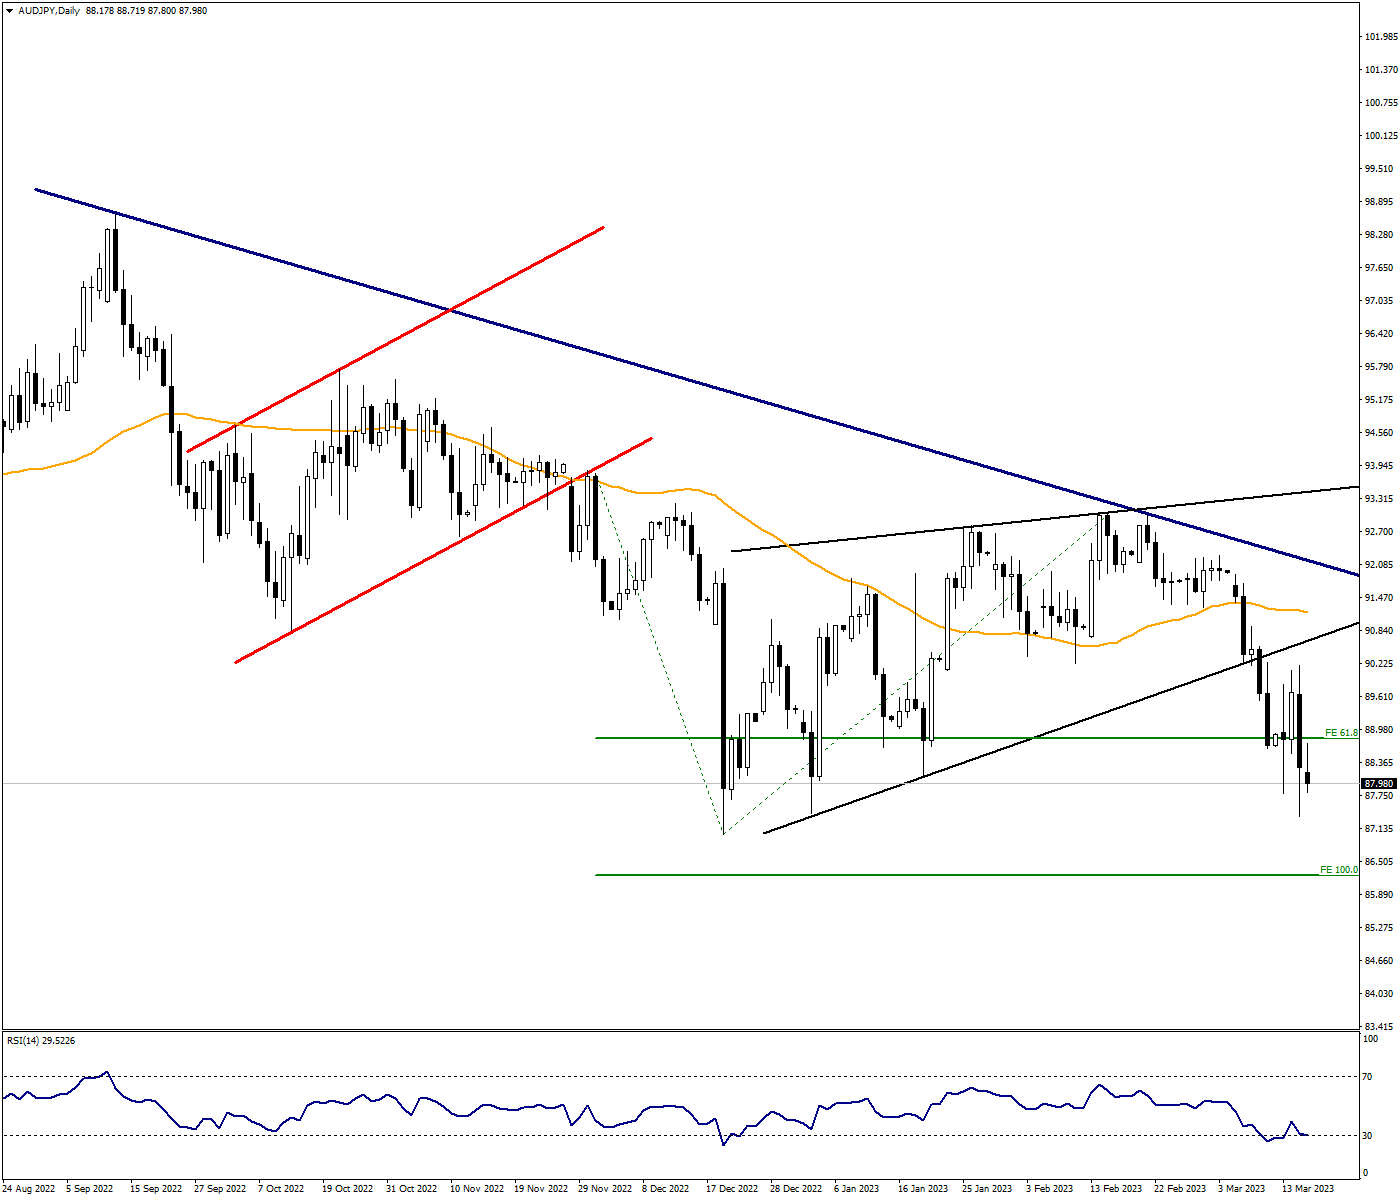 AUDJPY Continues Its Downward Demand